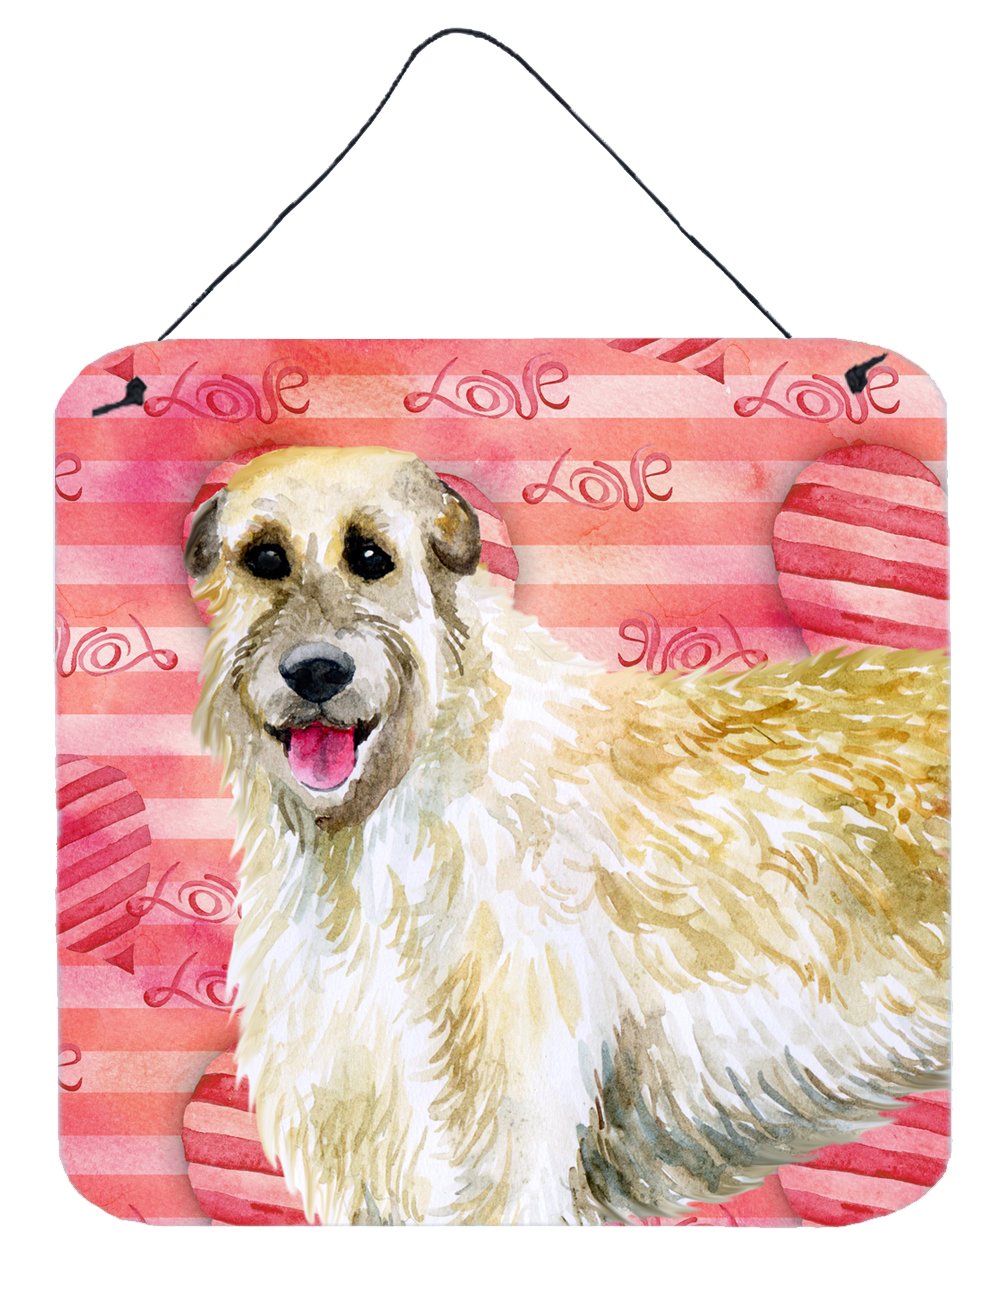 Irish Wolfhound Love Wall or Door Hanging Prints BB9757DS66 by Caroline's Treasures